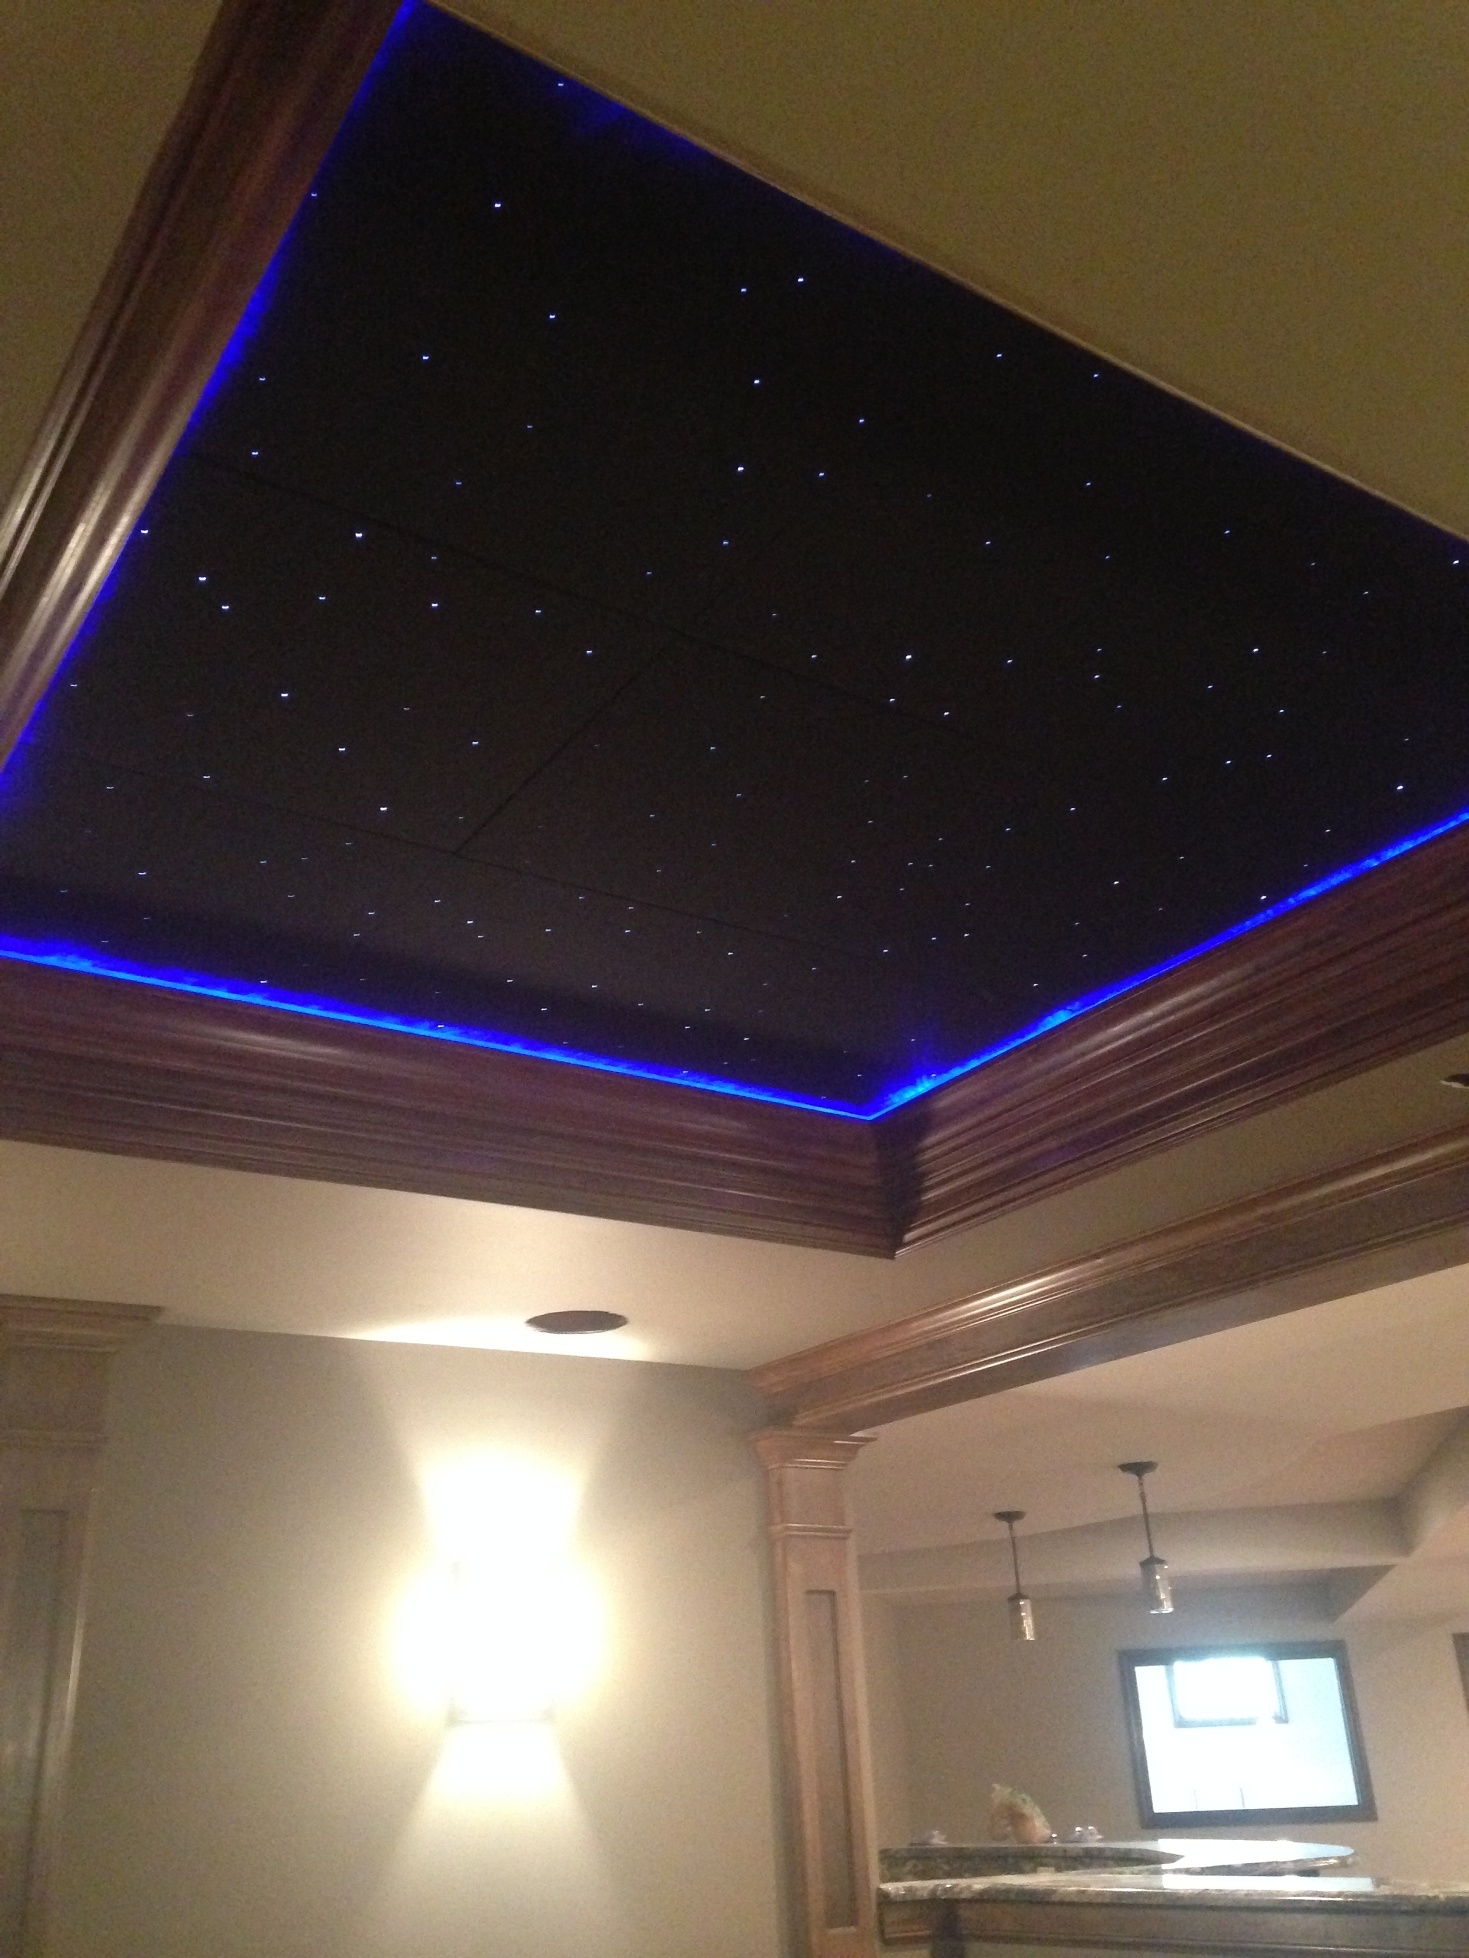 Permalink to Isky Star Ceiling Tiles